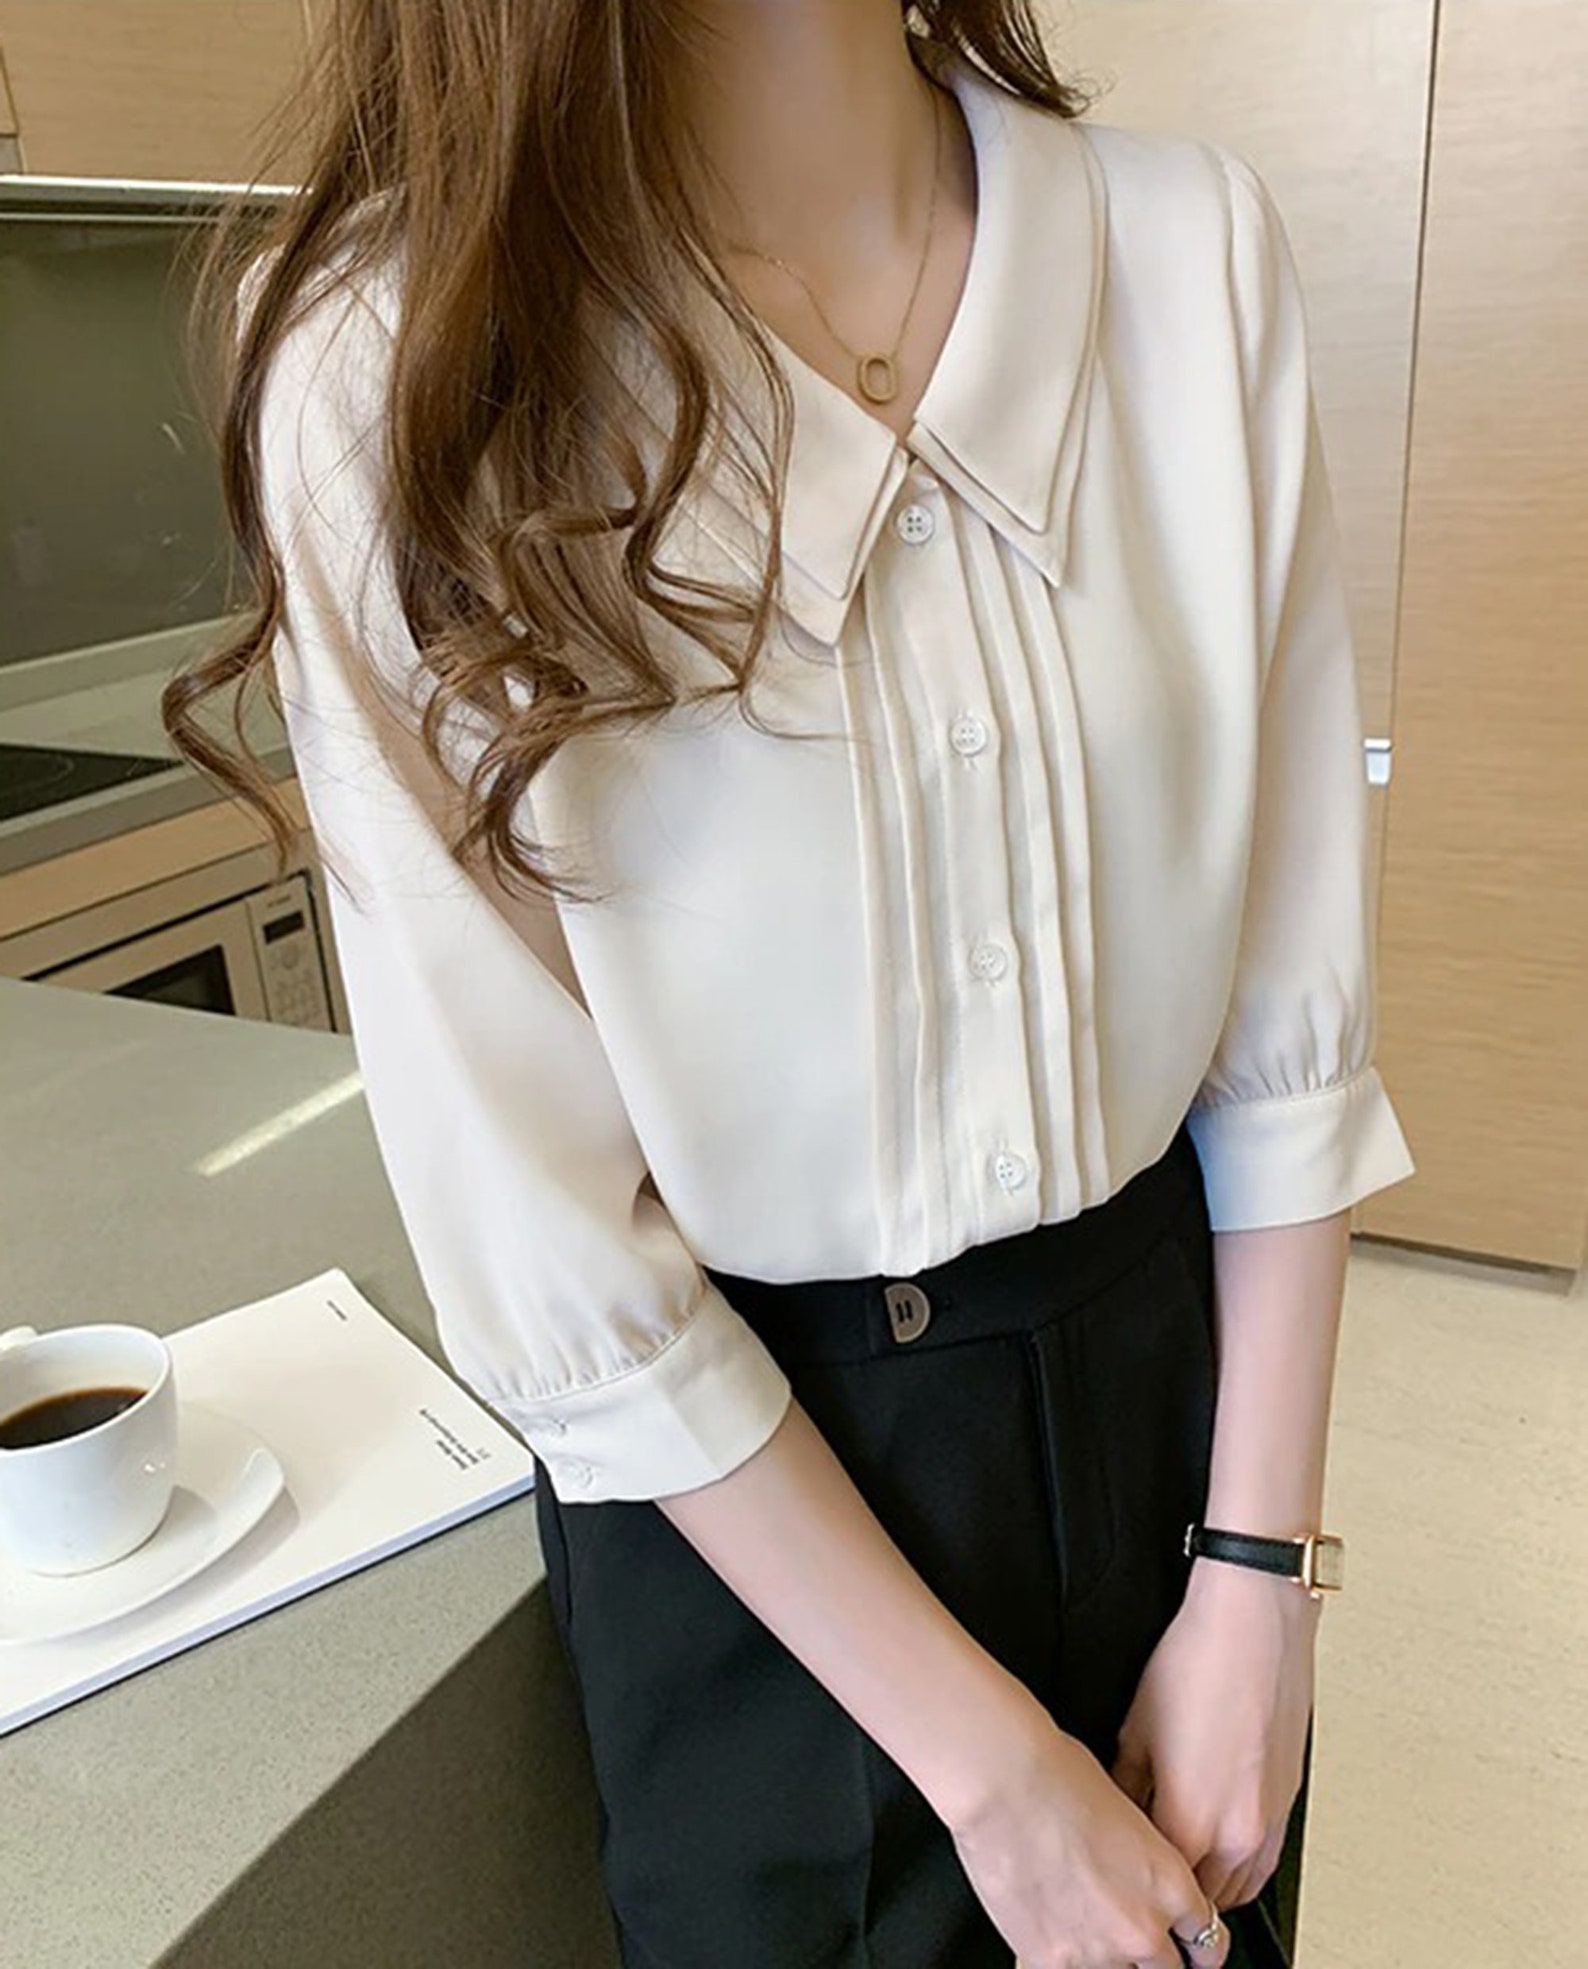 CHIFFON Blouse Office Ladies Collared Buttoned Short Sleeves - Etsy